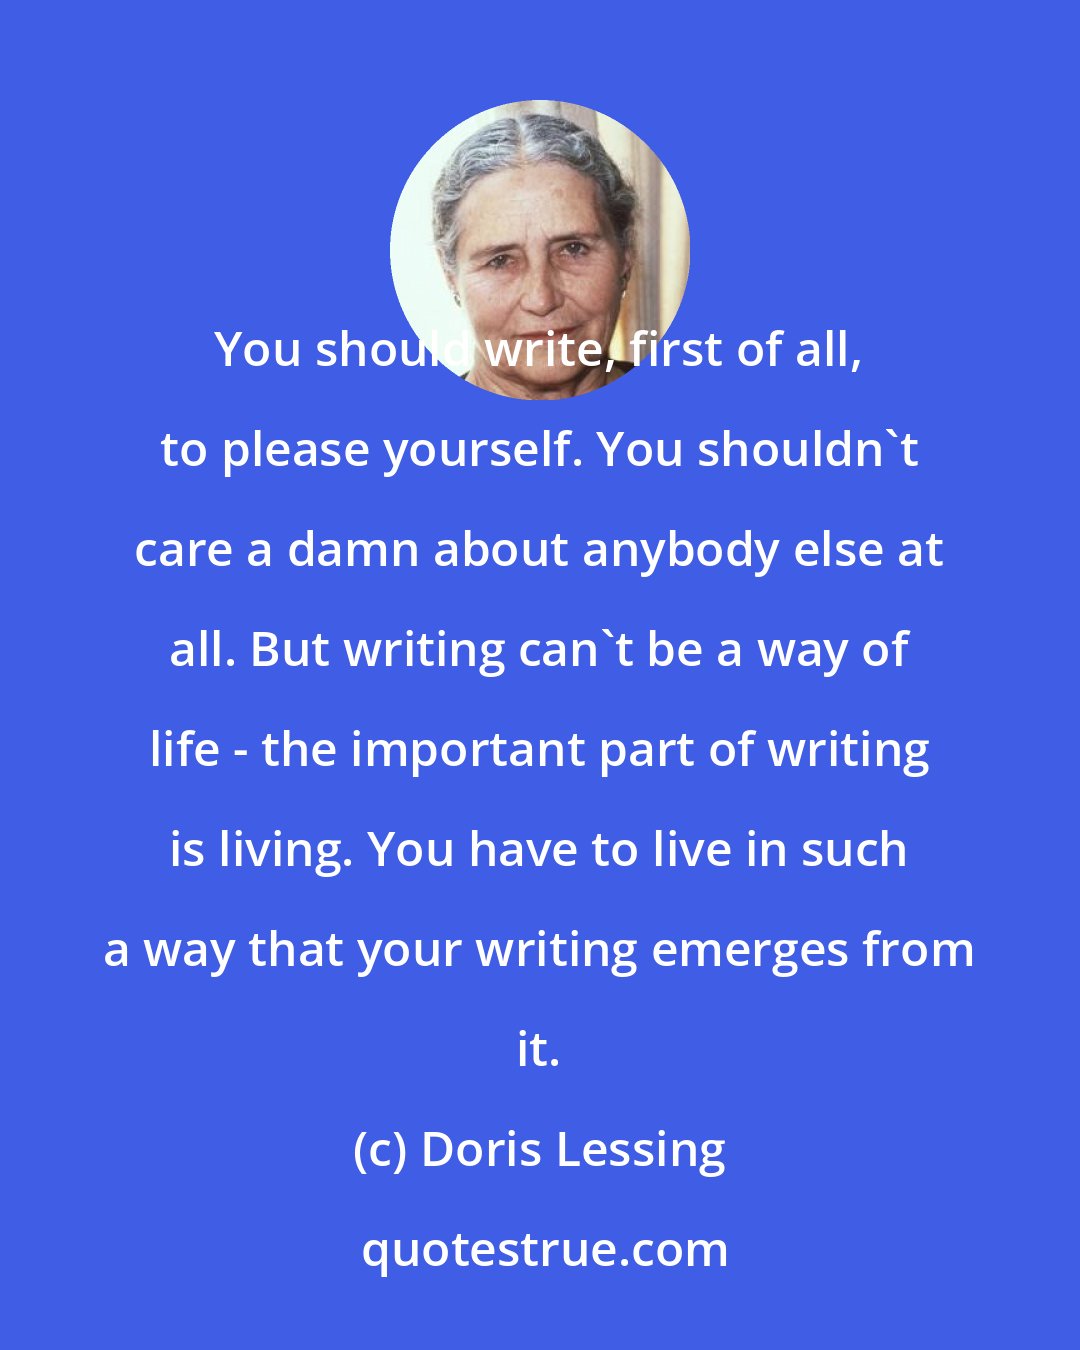 Doris Lessing: You should write, first of all, to please yourself. You shouldn't care a damn about anybody else at all. But writing can't be a way of life - the important part of writing is living. You have to live in such a way that your writing emerges from it.